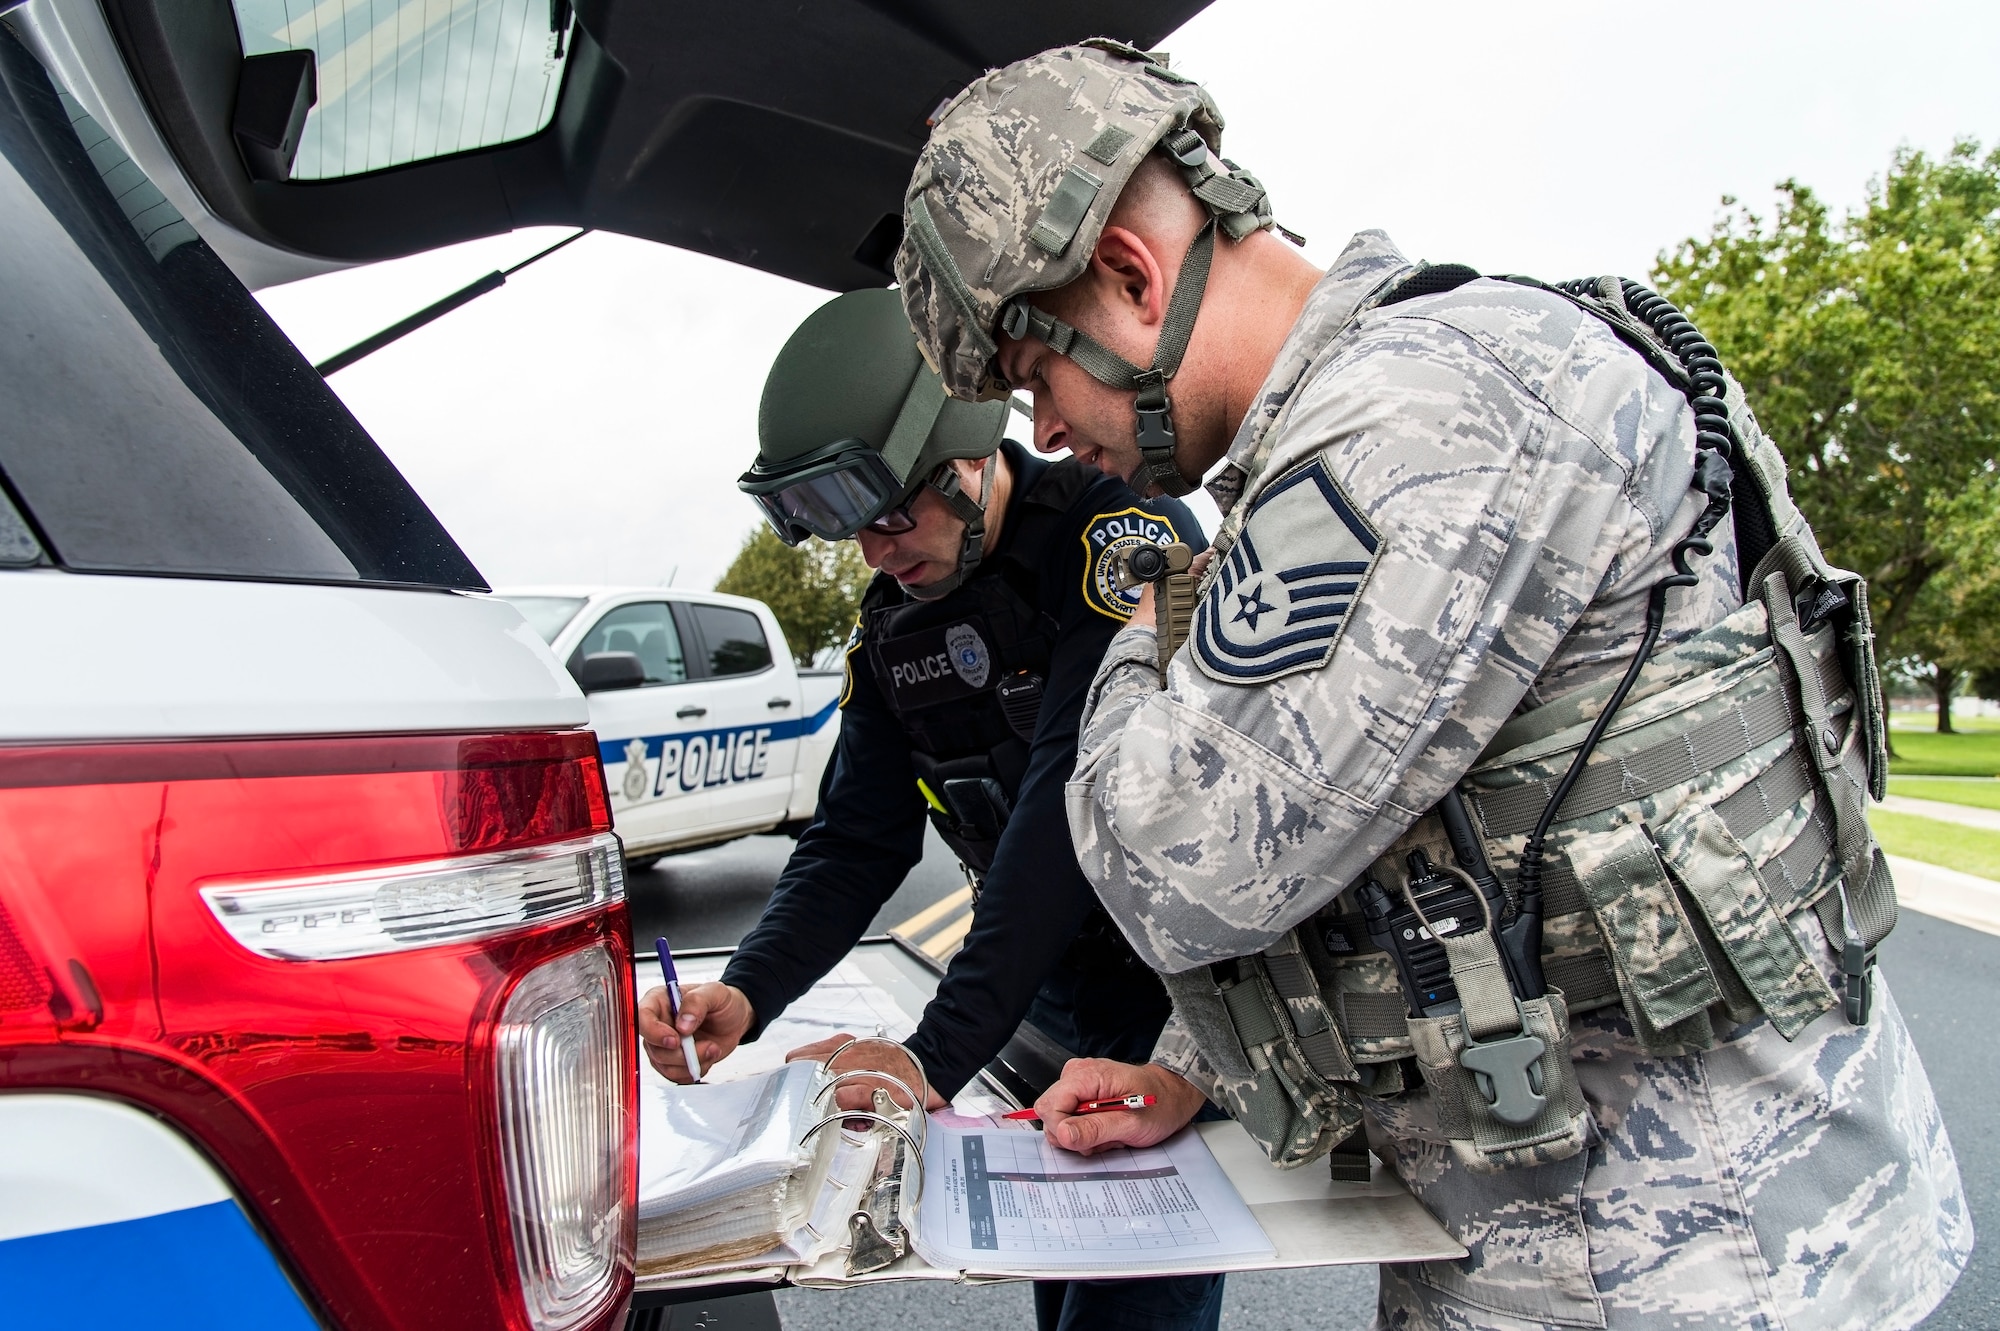 Justin Viens, supervisory police officer, and Master Sgt. Michael Kohne, flight chief, both assigned to the 436th Security Forces Squadron, go through an incident checklist to set up a cordon Sept. 17, 2018, on Dover Air Force Base, Del. Viens and Kohne coordinated efforts to secure the area around the base’s centralized mail handling facility where a mock unknown substance had leaked from a package inside the mailroom. This scenario was part of the base-wide Force Protection/Major Accident Response Exercise. (U.S. Air Force photo by Roland Balik)